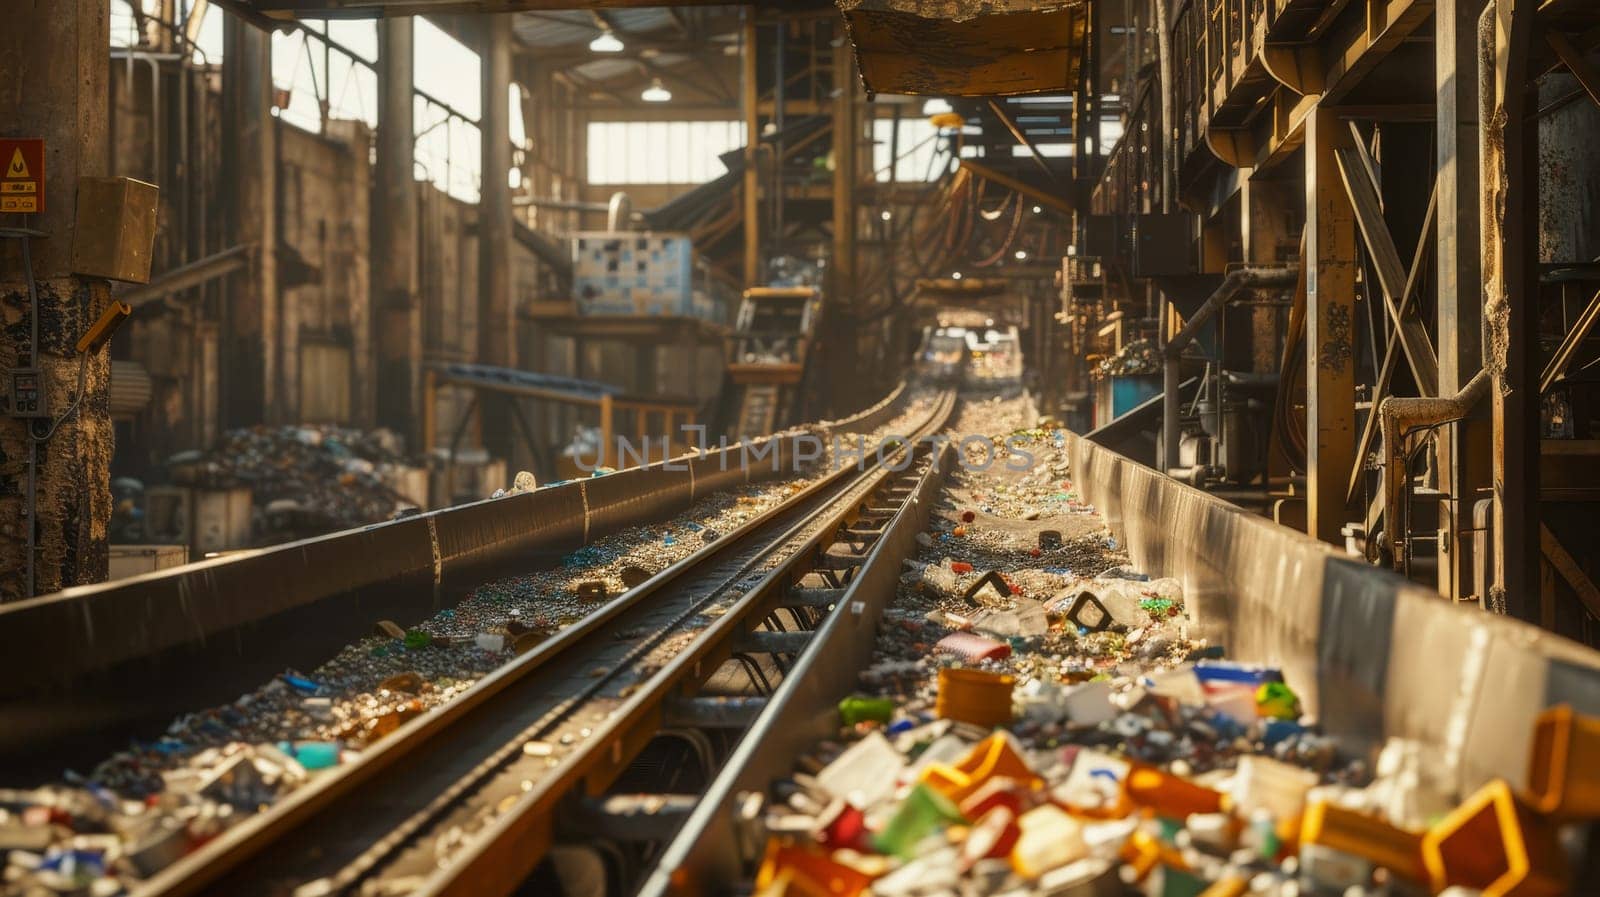 Warm sunset light casts over a recycling facility's conveyor belts laden with waste materials